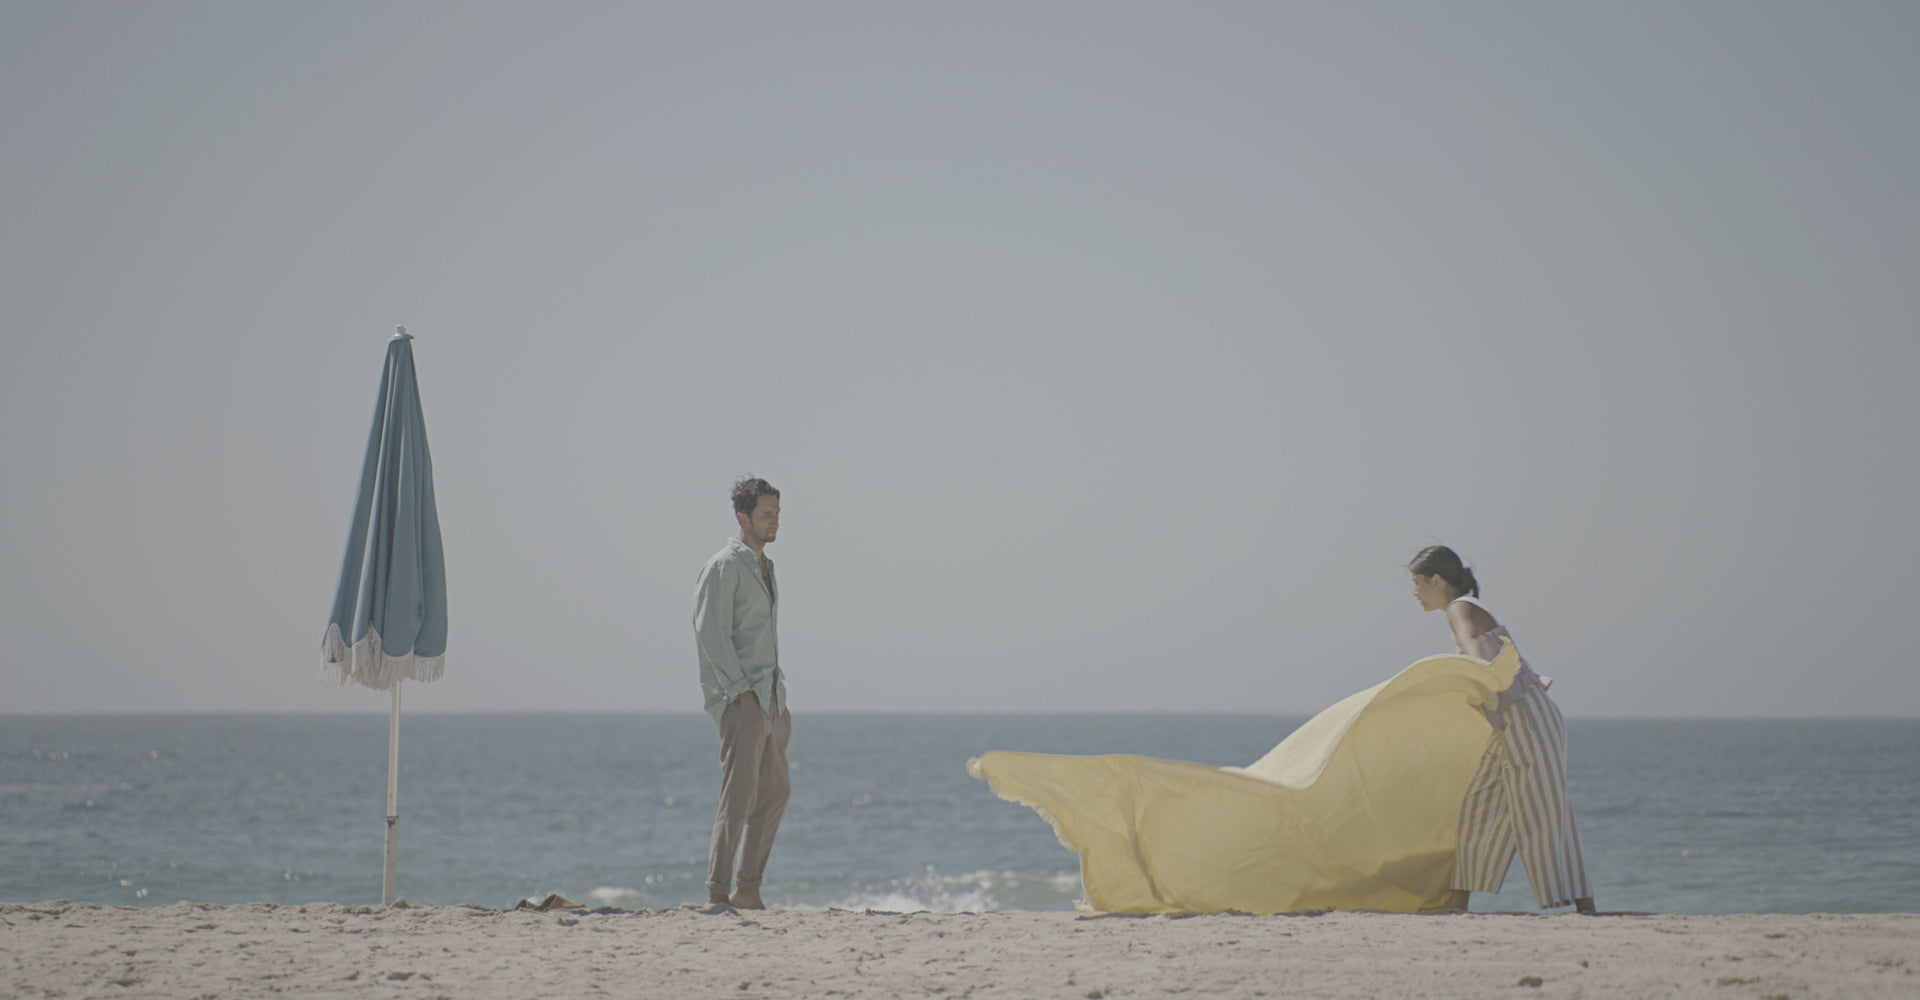 A man and woman setting a blanket on the beach.